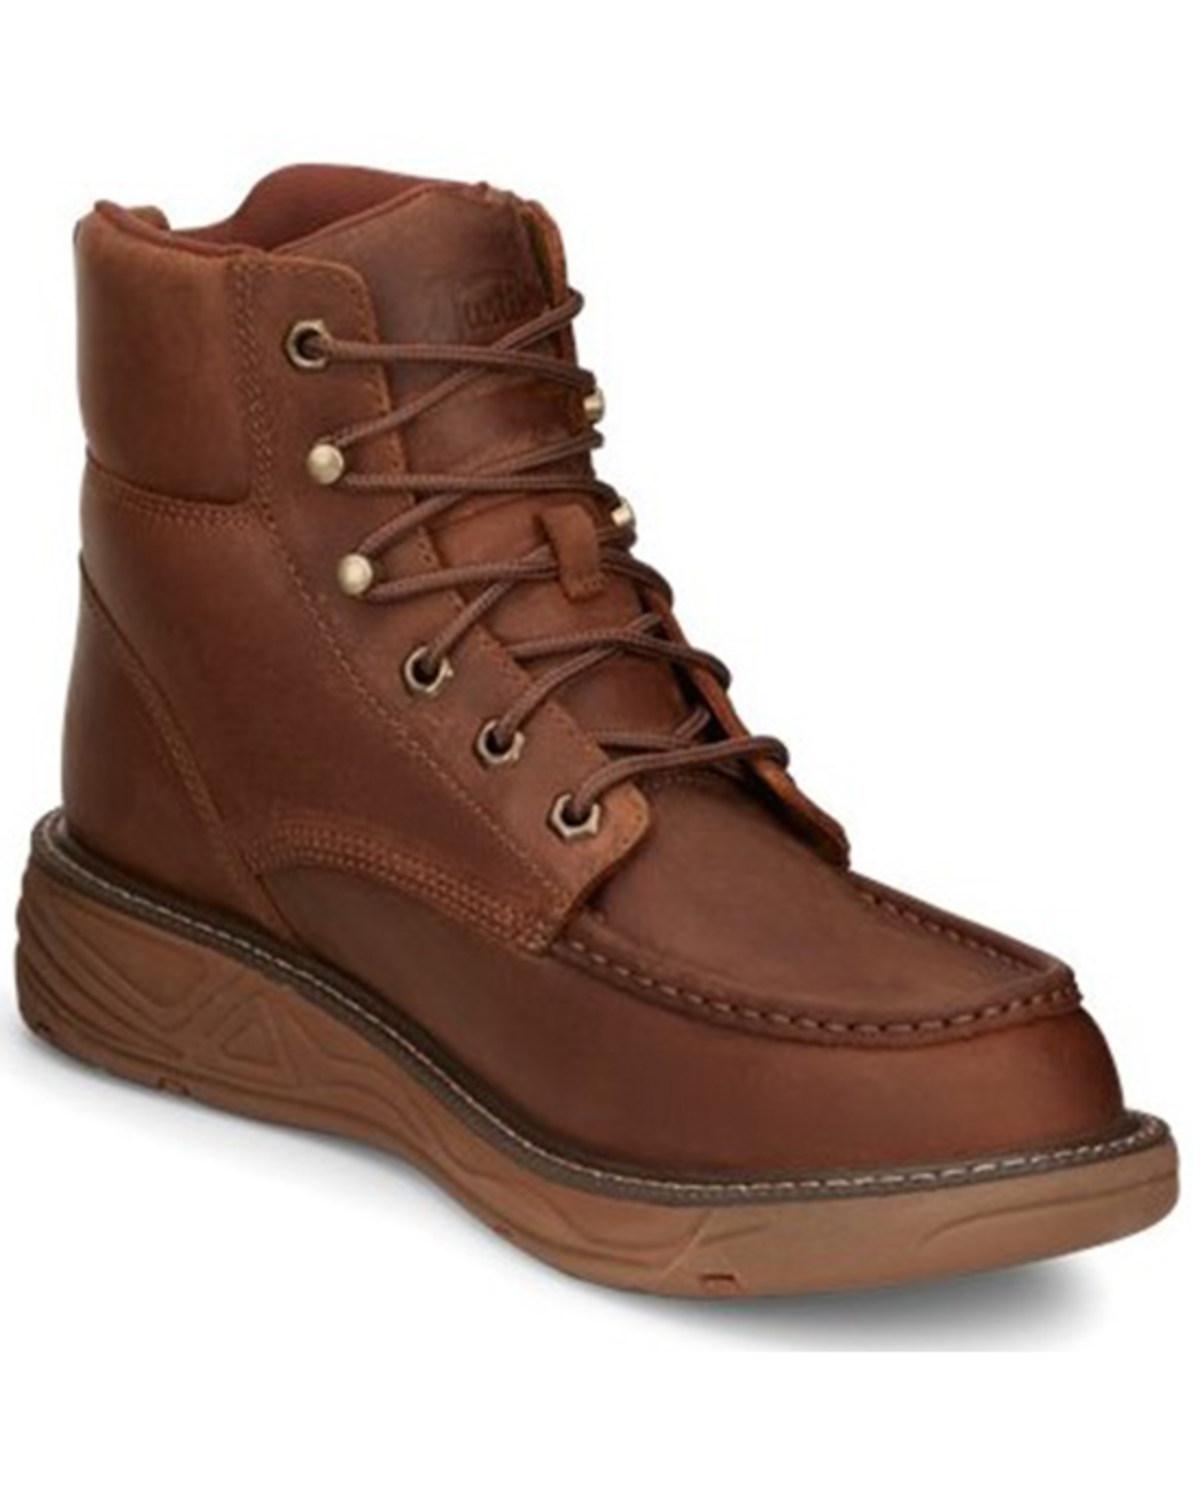 Justin Men's Rush Waterproof 6" Lace-Up Nano Non-Comp Wedge Work Boots - Moc Toe